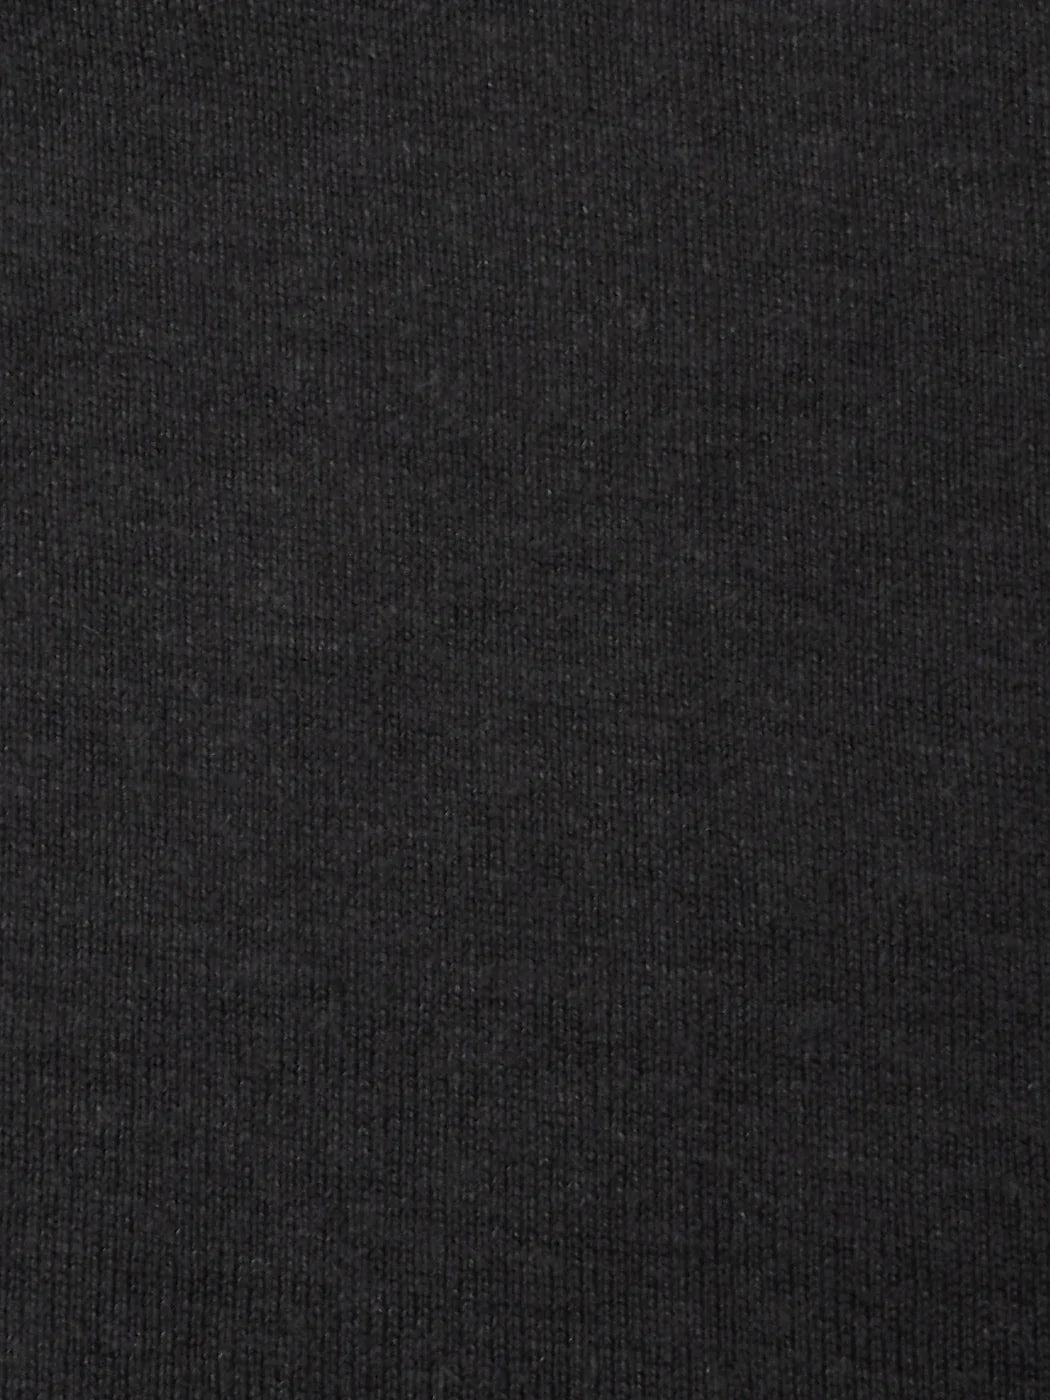 Ultra close of hemp and lyocell jersey knit fabric in black